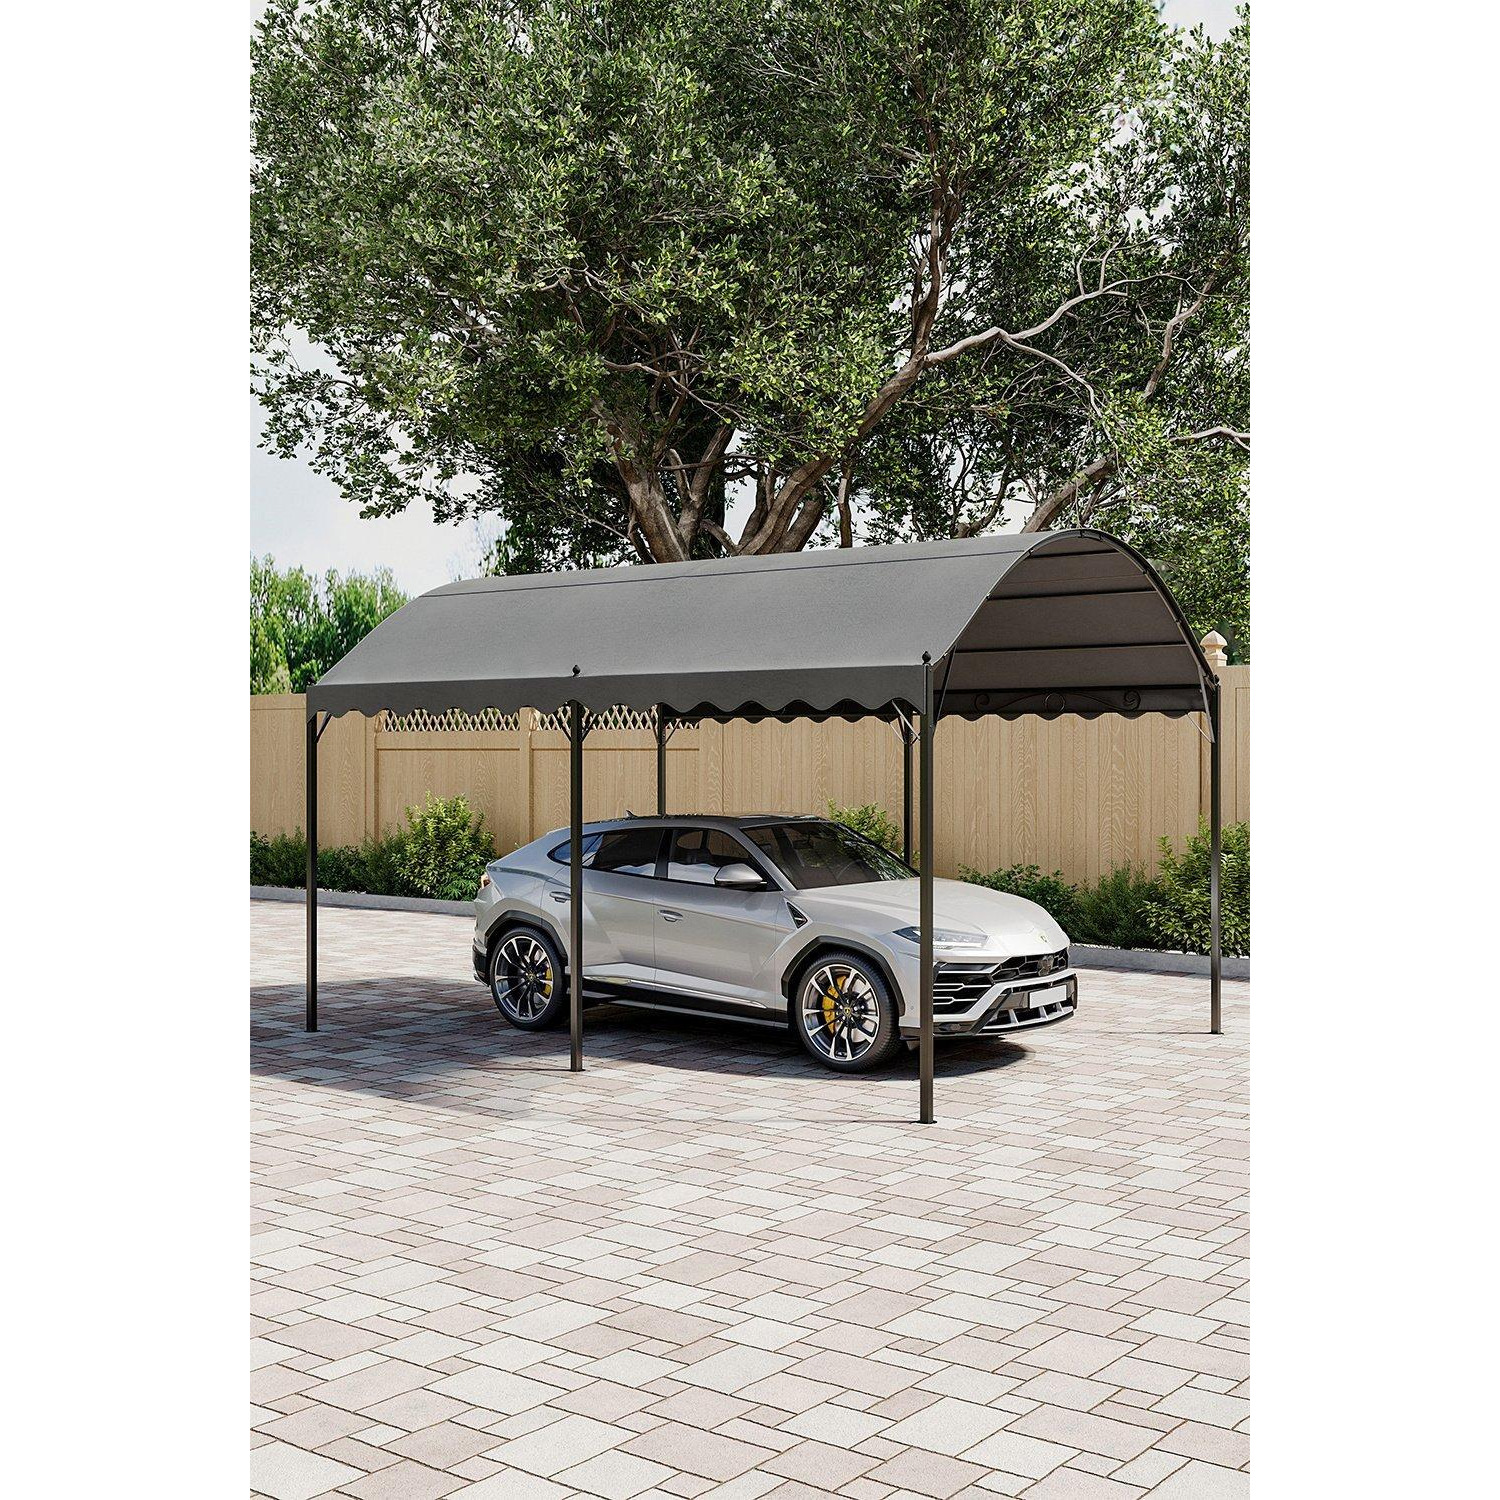 Outdoor Metal Arched Pergola with Shade - image 1